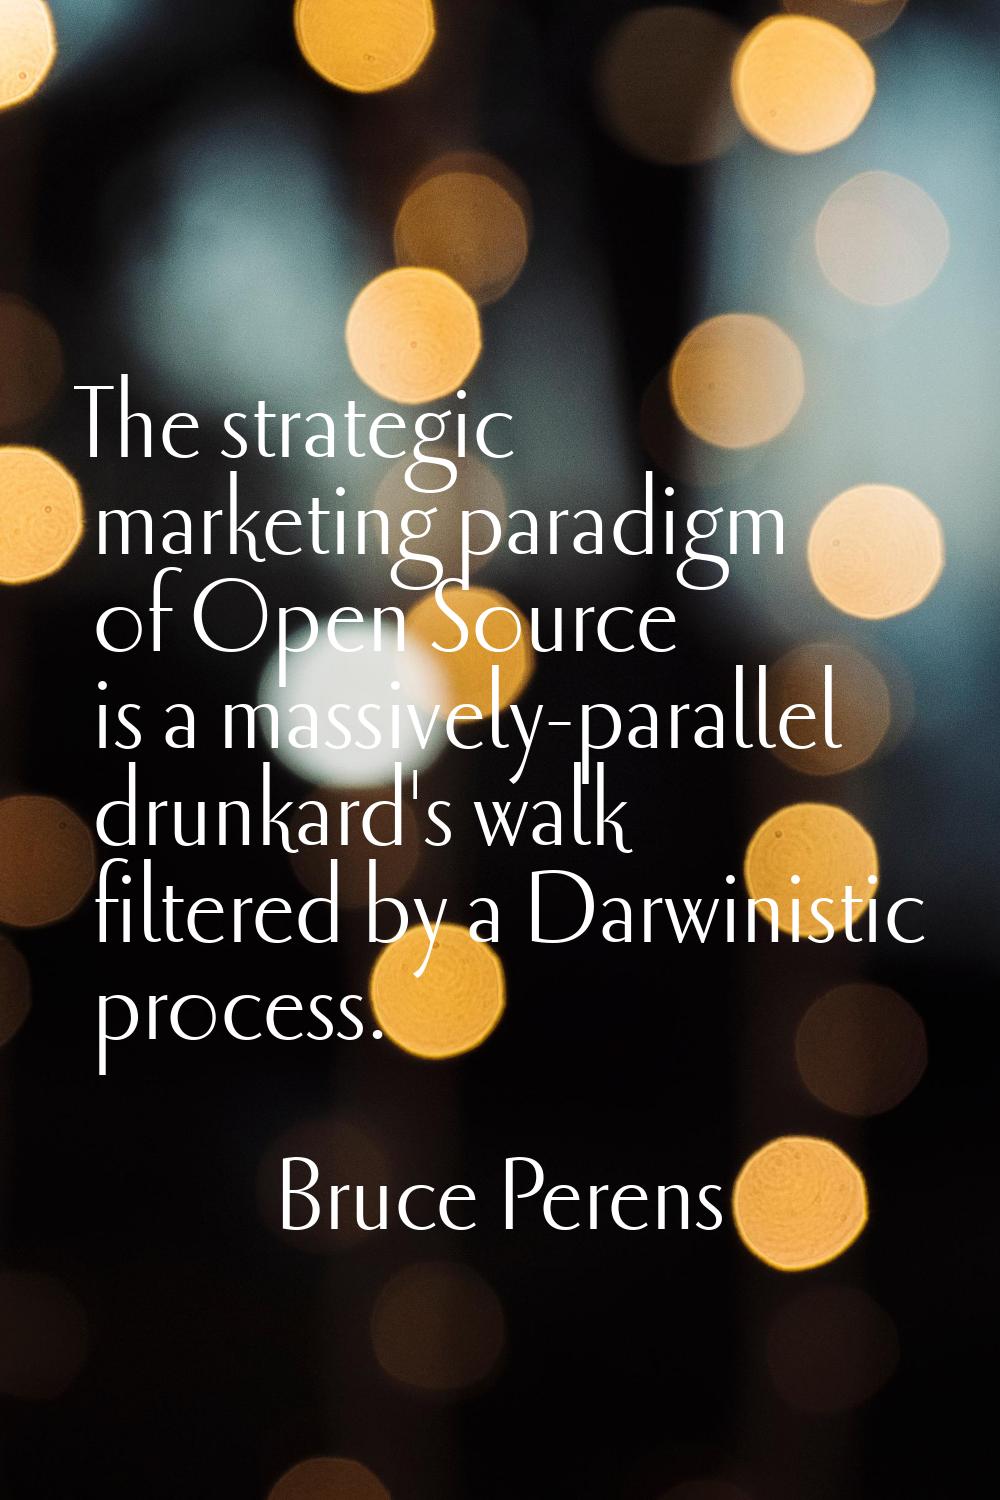 The strategic marketing paradigm of Open Source is a massively-parallel drunkard's walk filtered by